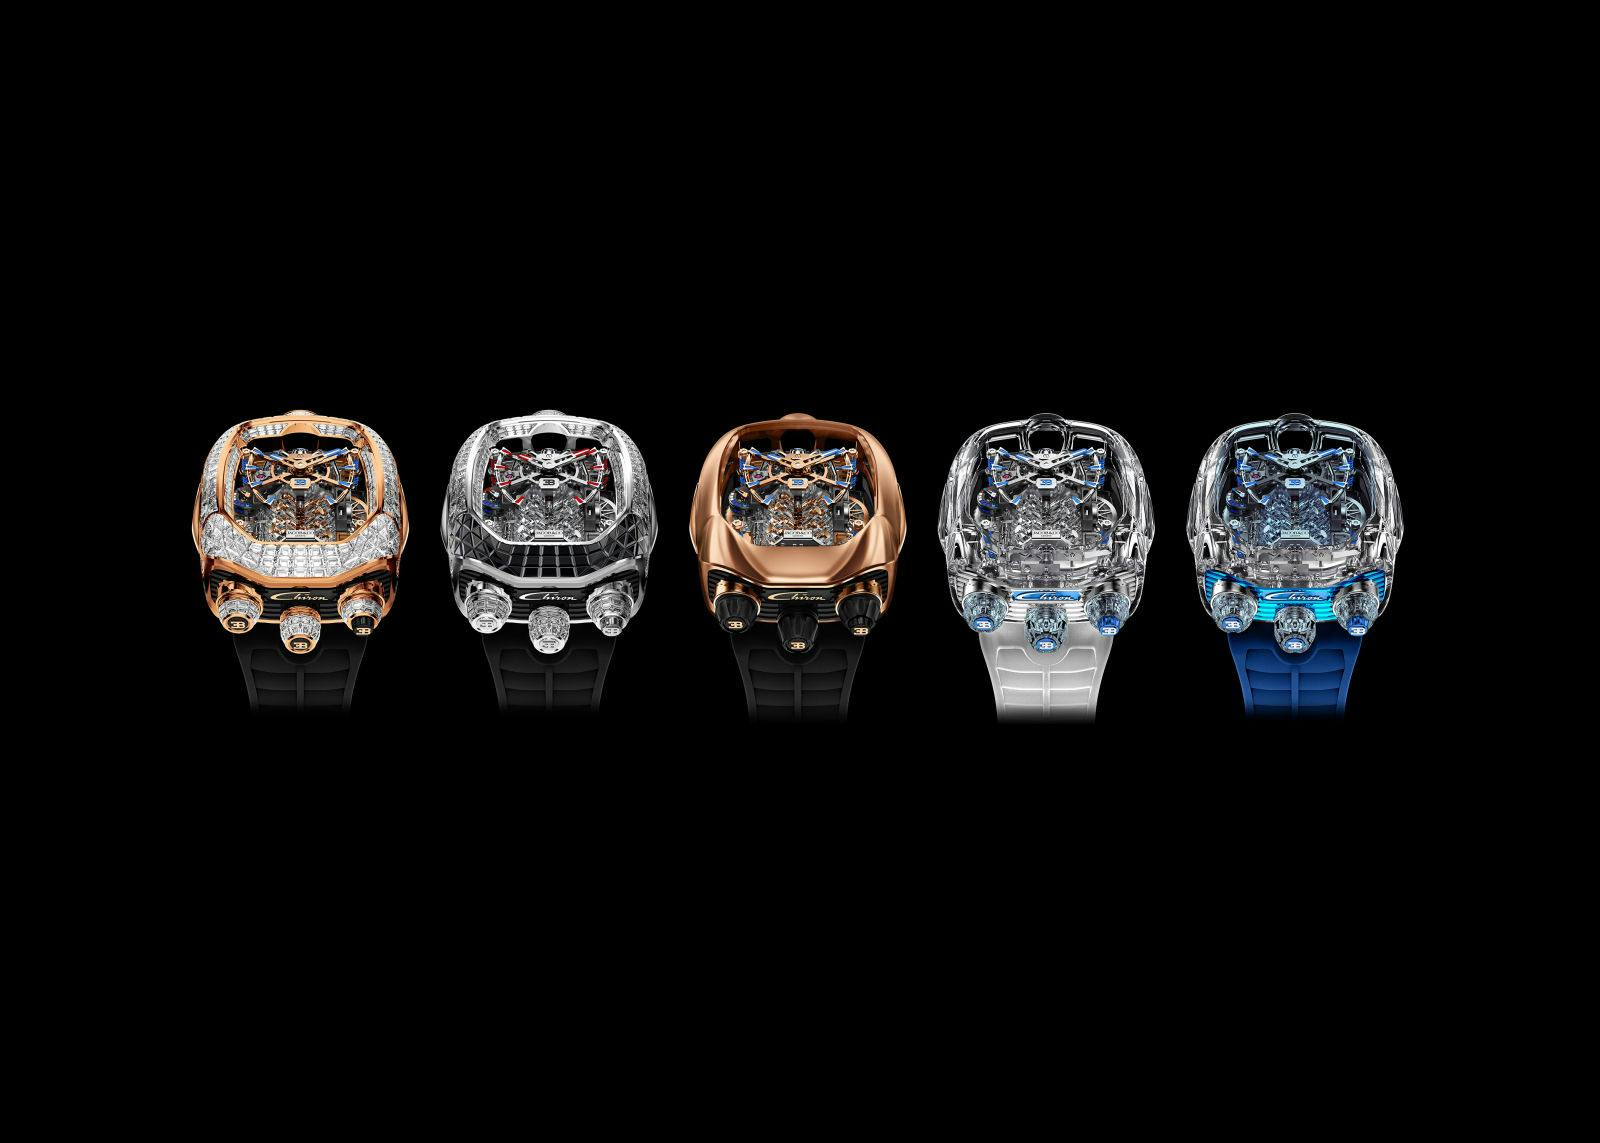 Luxury like no other: New Bugatti Chiron Tourbillon Timepiece Limited Editions. Four new editions reflect Bugatti design, energy and craftsmanship in a timepiece to honor the iconic Chiron.